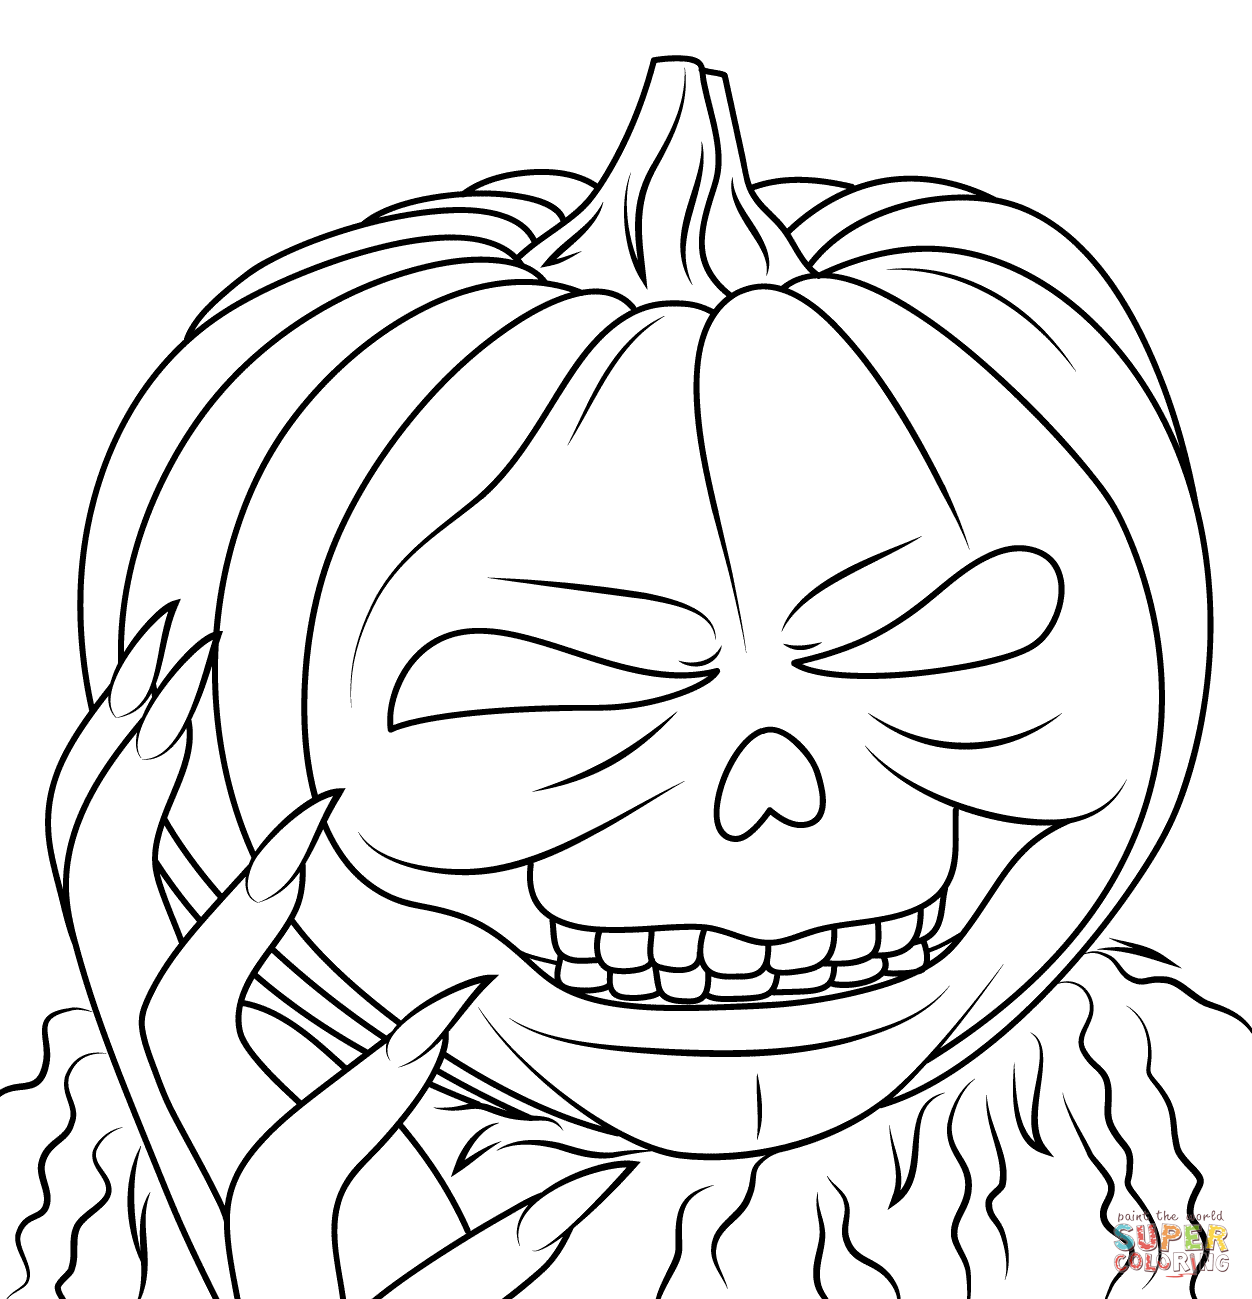 goosebumps coloring pages - High Quality Coloring Pages